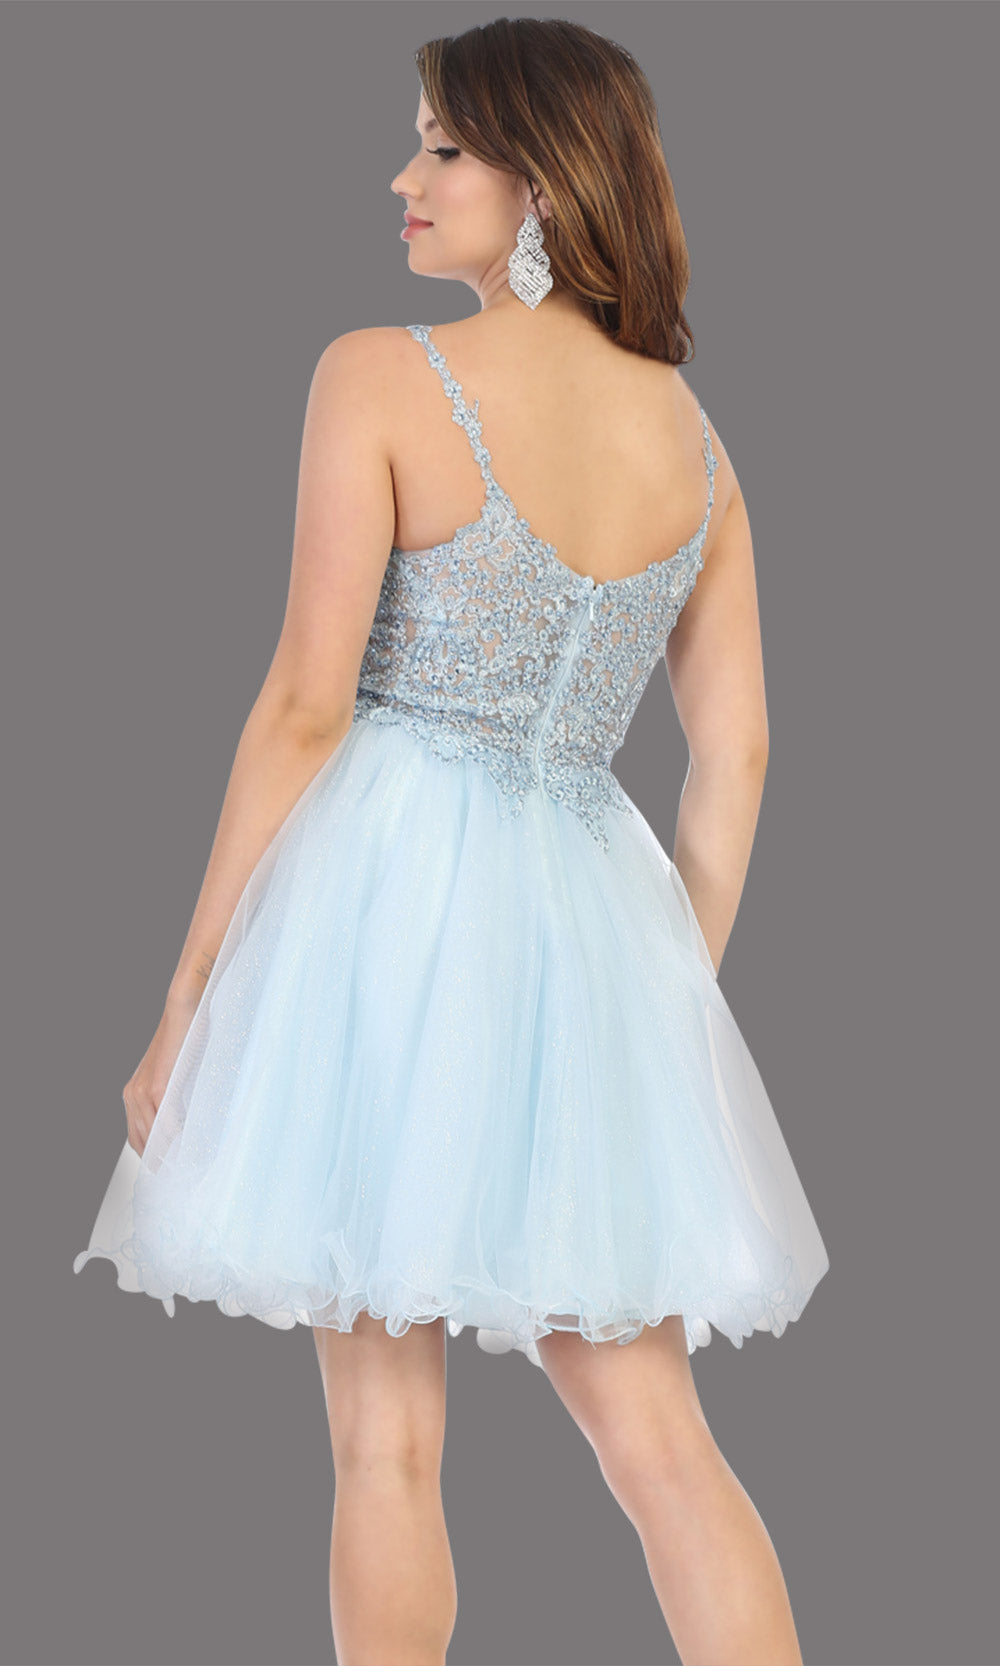 Mayqueen Mq1693 short baby blue flowy v neck beaded sequin grade 8 graduation dress w/straps & puffy skirt. This light blue party dress is perfect for prom, graduation, grade 8 grad, confirmation dress, bat mitzvah dress, damas. Plus sizes avail-b.jpggrade 8 grad dresses, graduation dresses